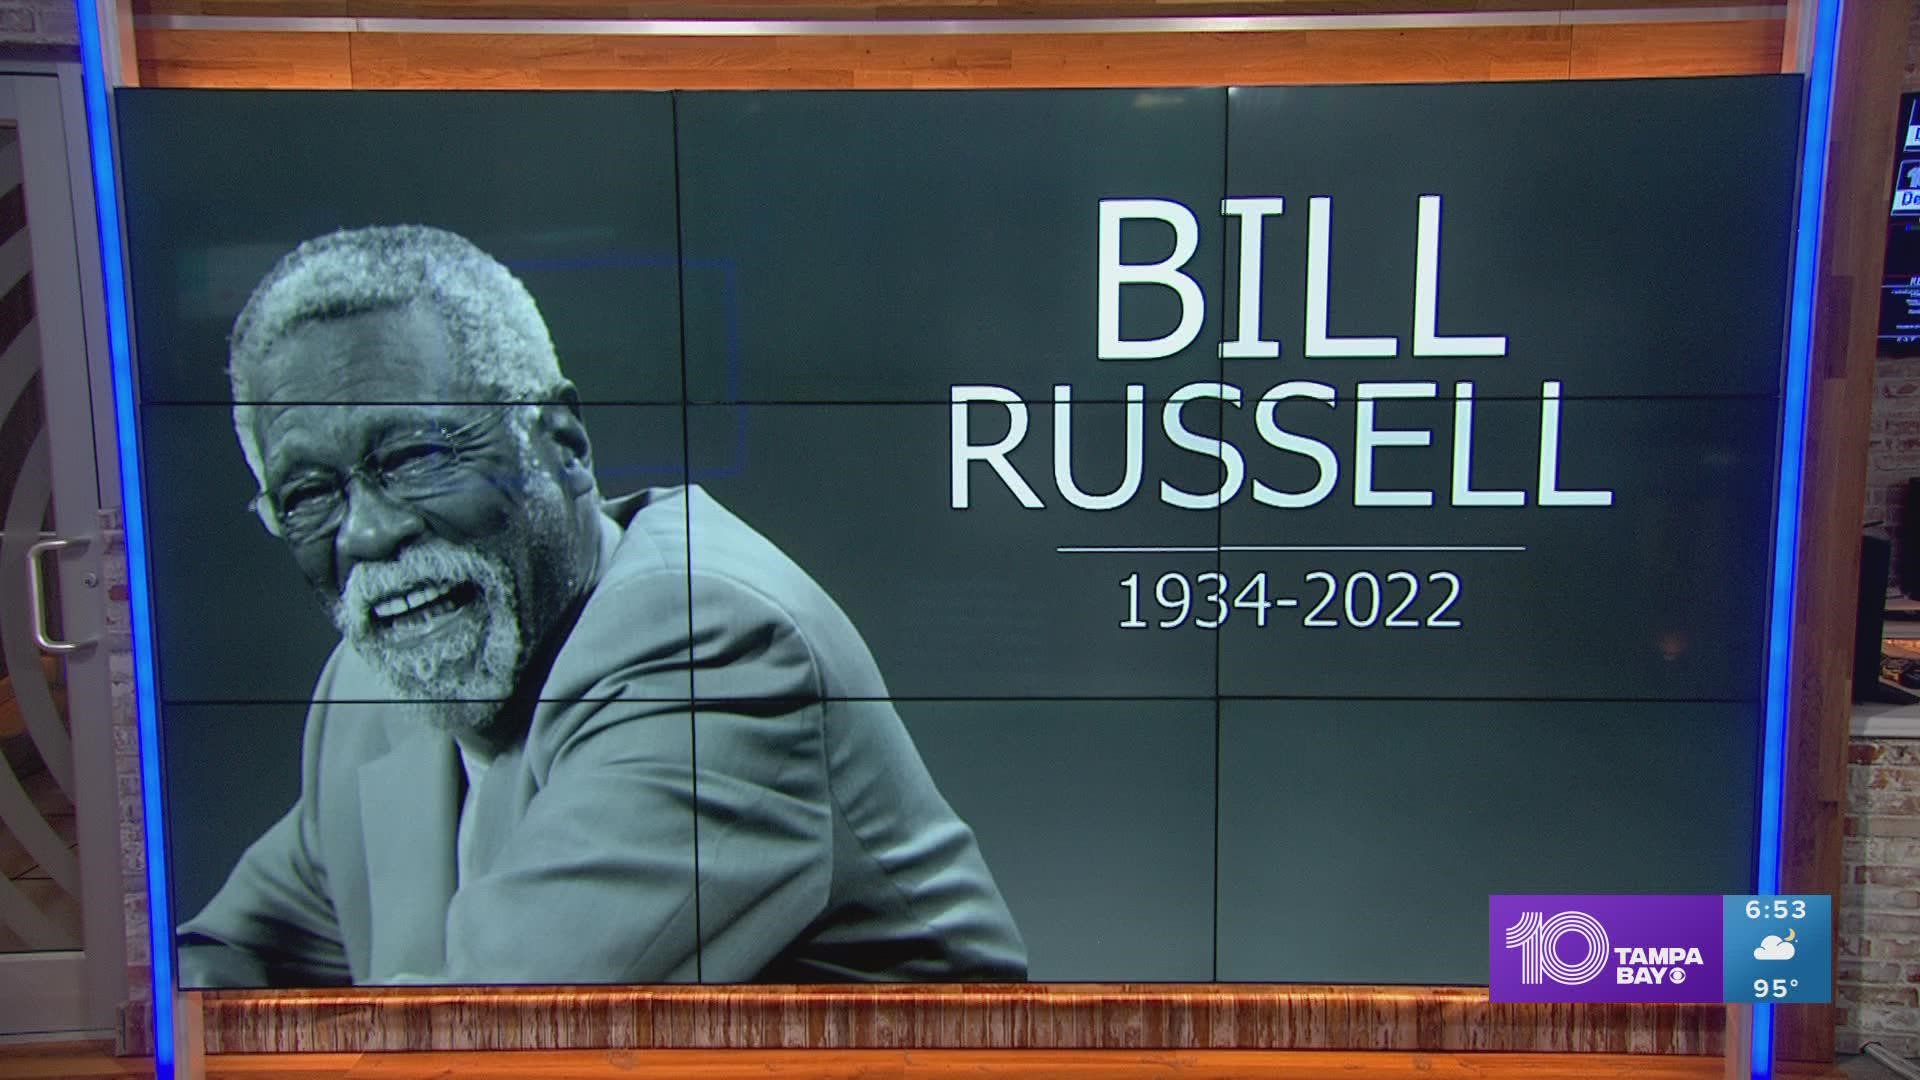 Celtics legend Bill Russell number is being retired and we believe